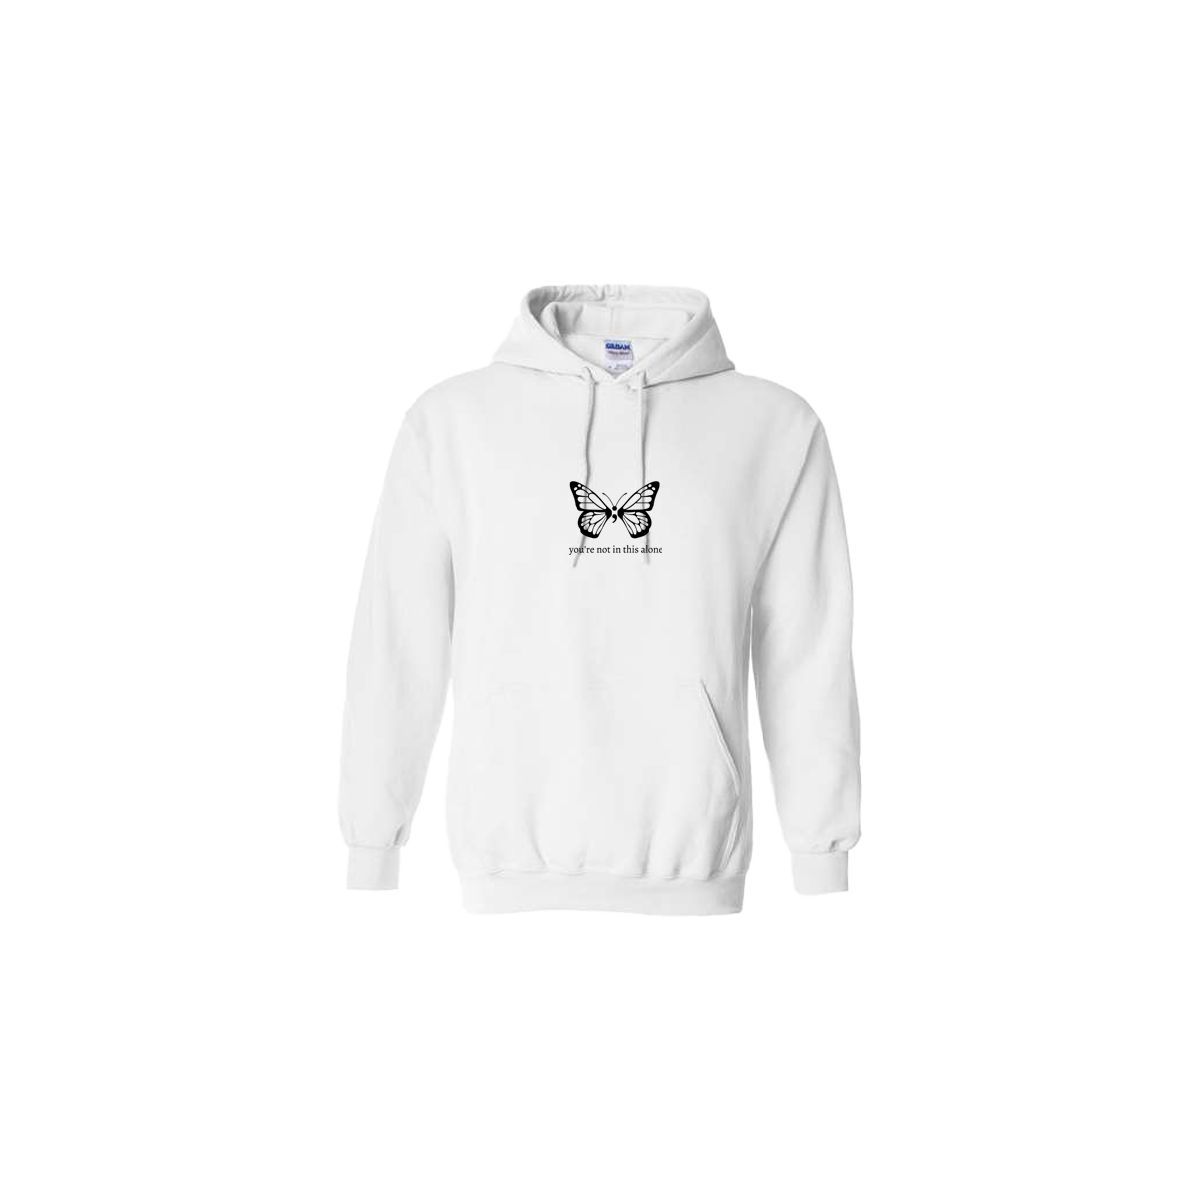 You're Not In This Alone Butterfly Embroidered White Hoodie - Mental Health Awareness Clothing